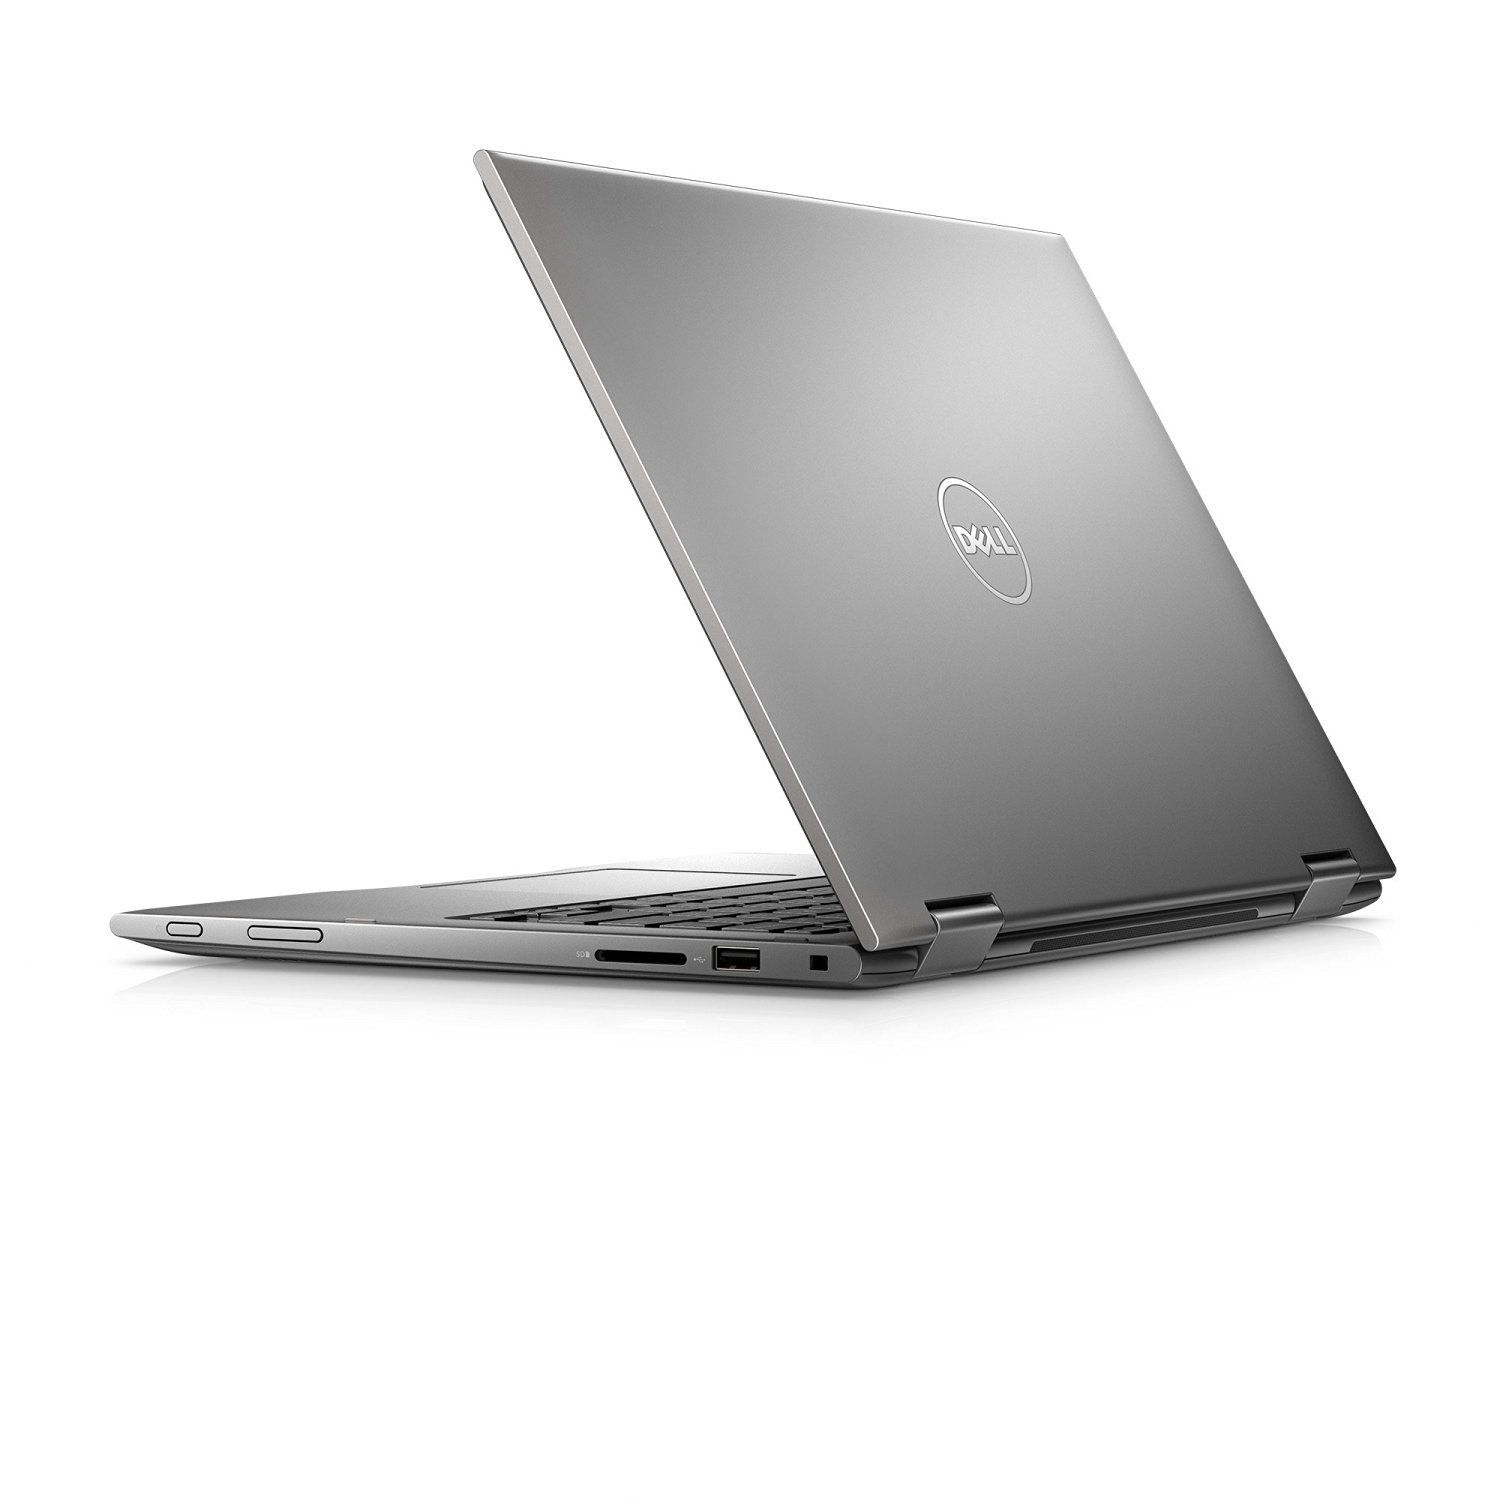 Dell Inspiron 13-5378 Intel Core i7-7500U X2 2.7GHz 8GB 256GB SSD 13.3", Gray (Scratch and Dent)